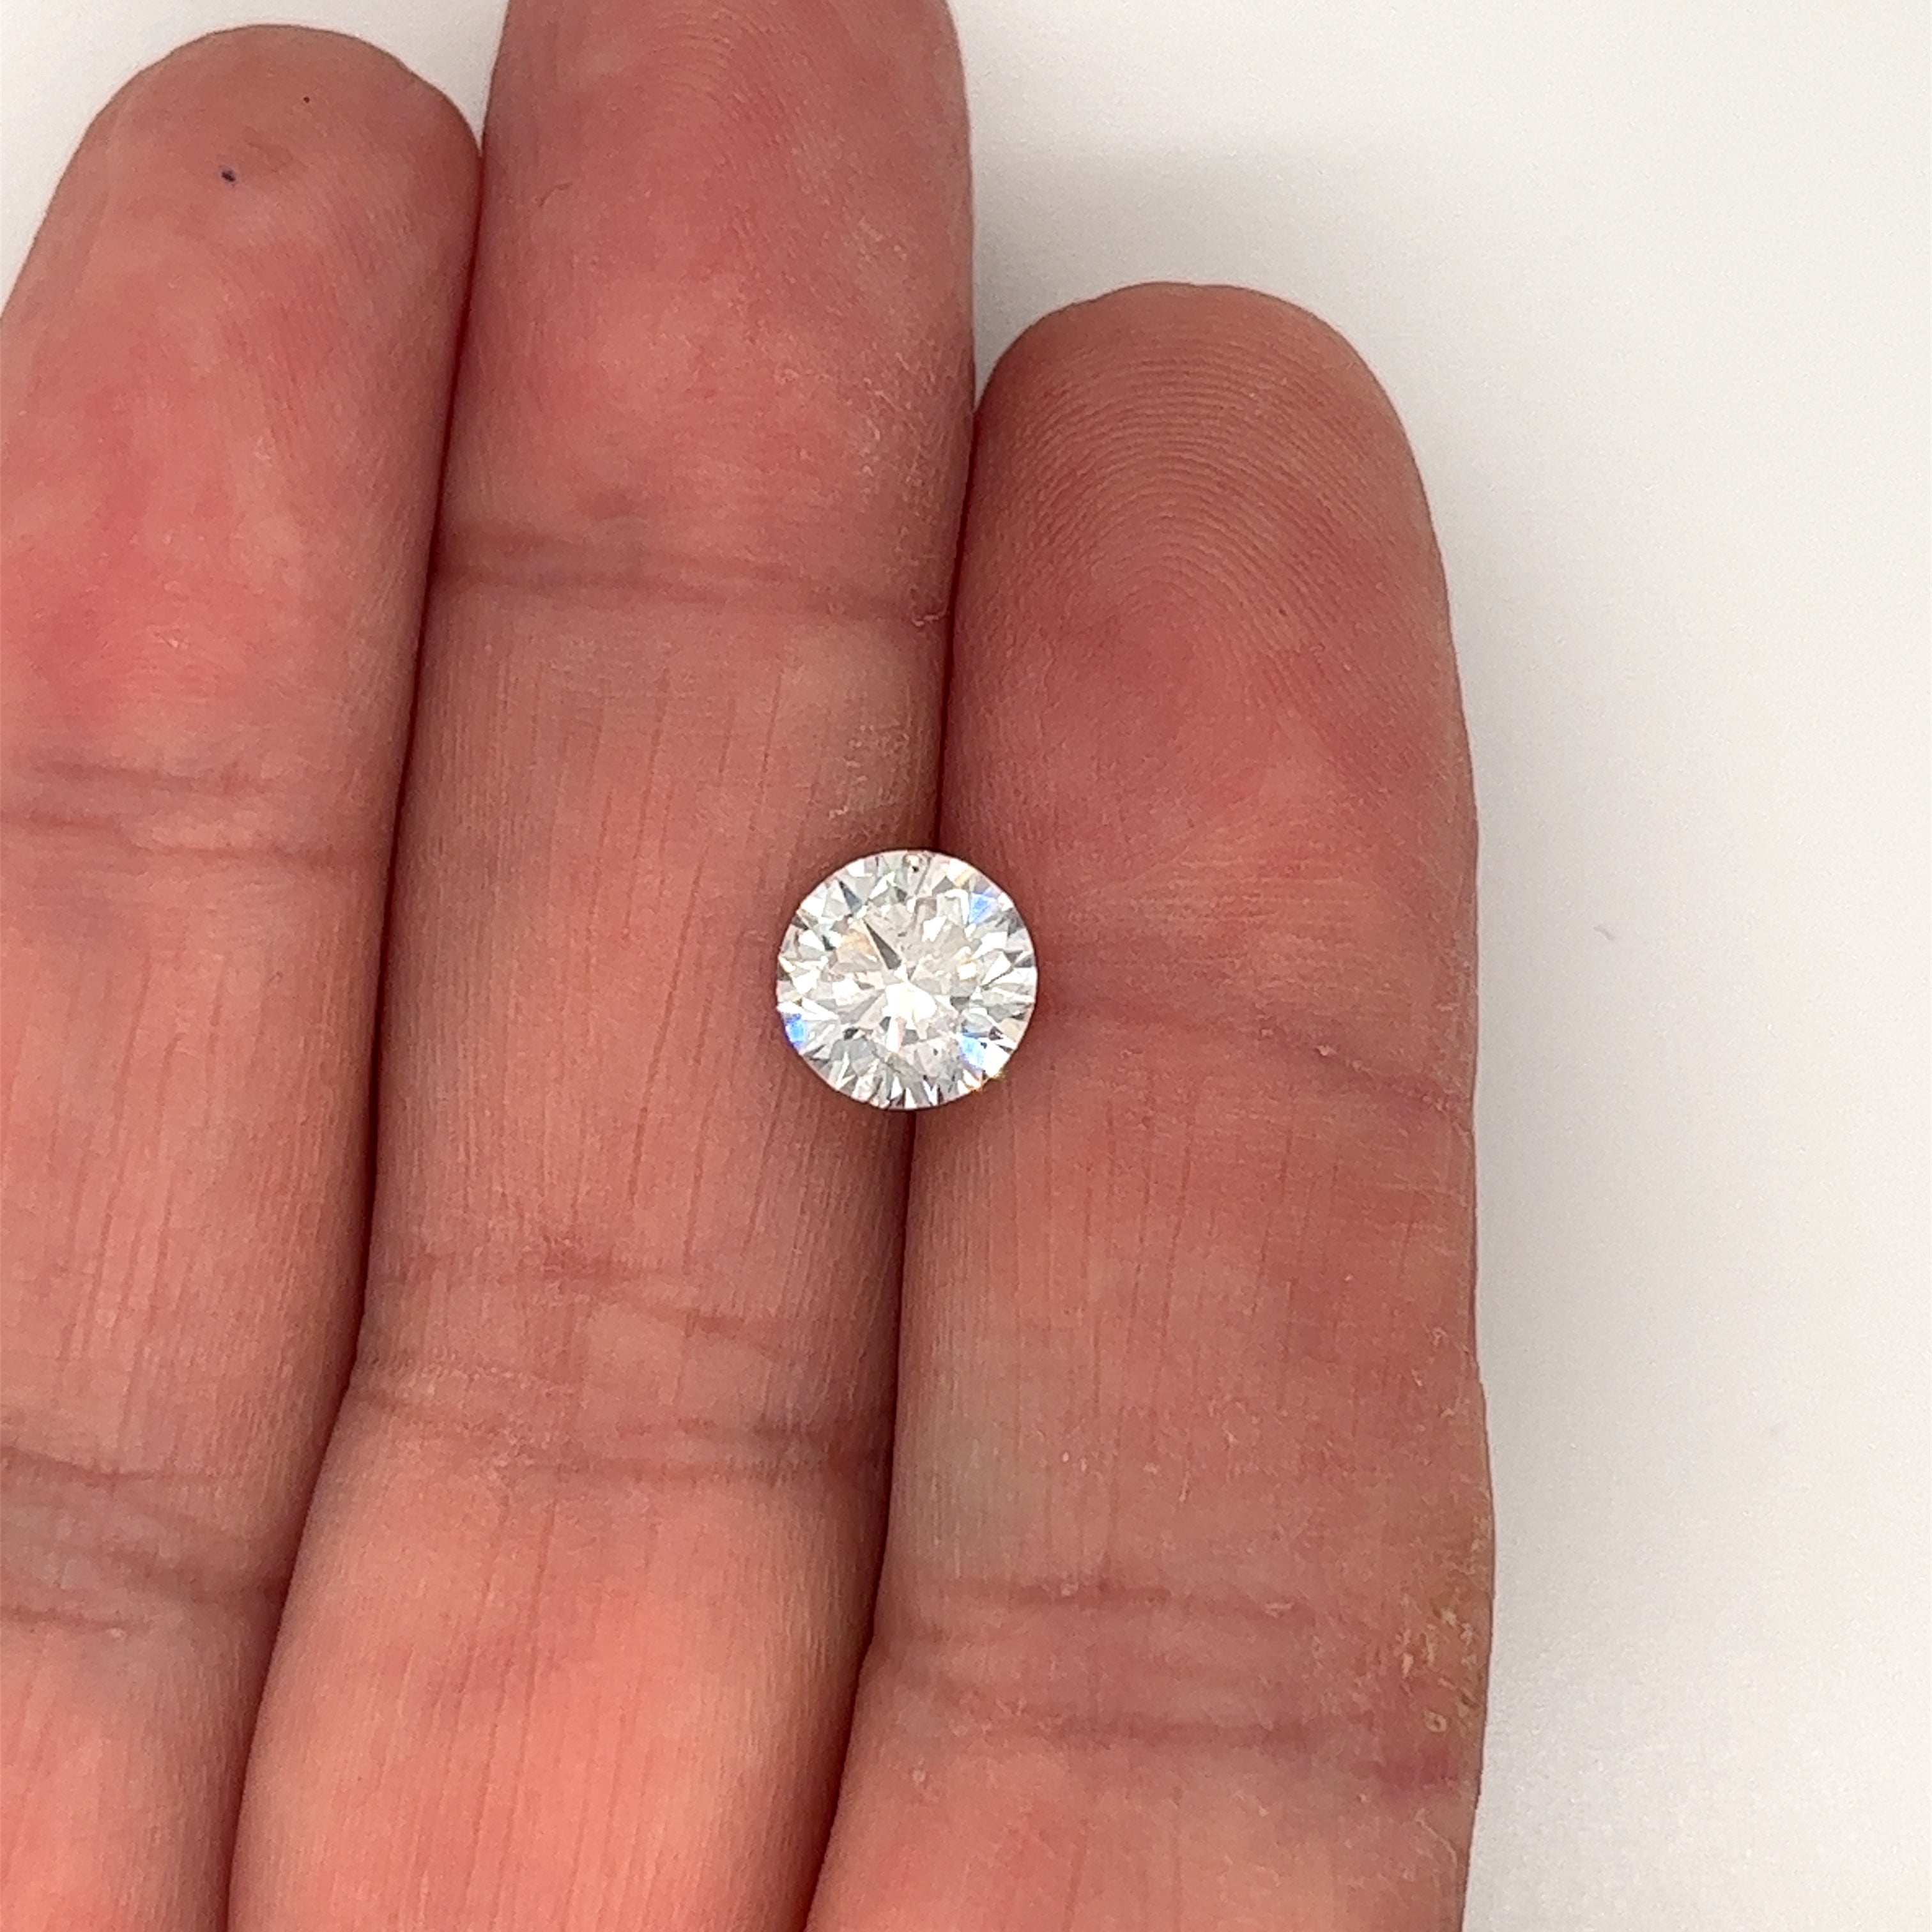 GIA certified natural 1.72-carat round-brilliant loose diamond with H color and I1 clarity. Featuring excellent cut, polish and symmetry. The stone is an absolute bargain considering how it optically looks. The inclusions are in not visible to the